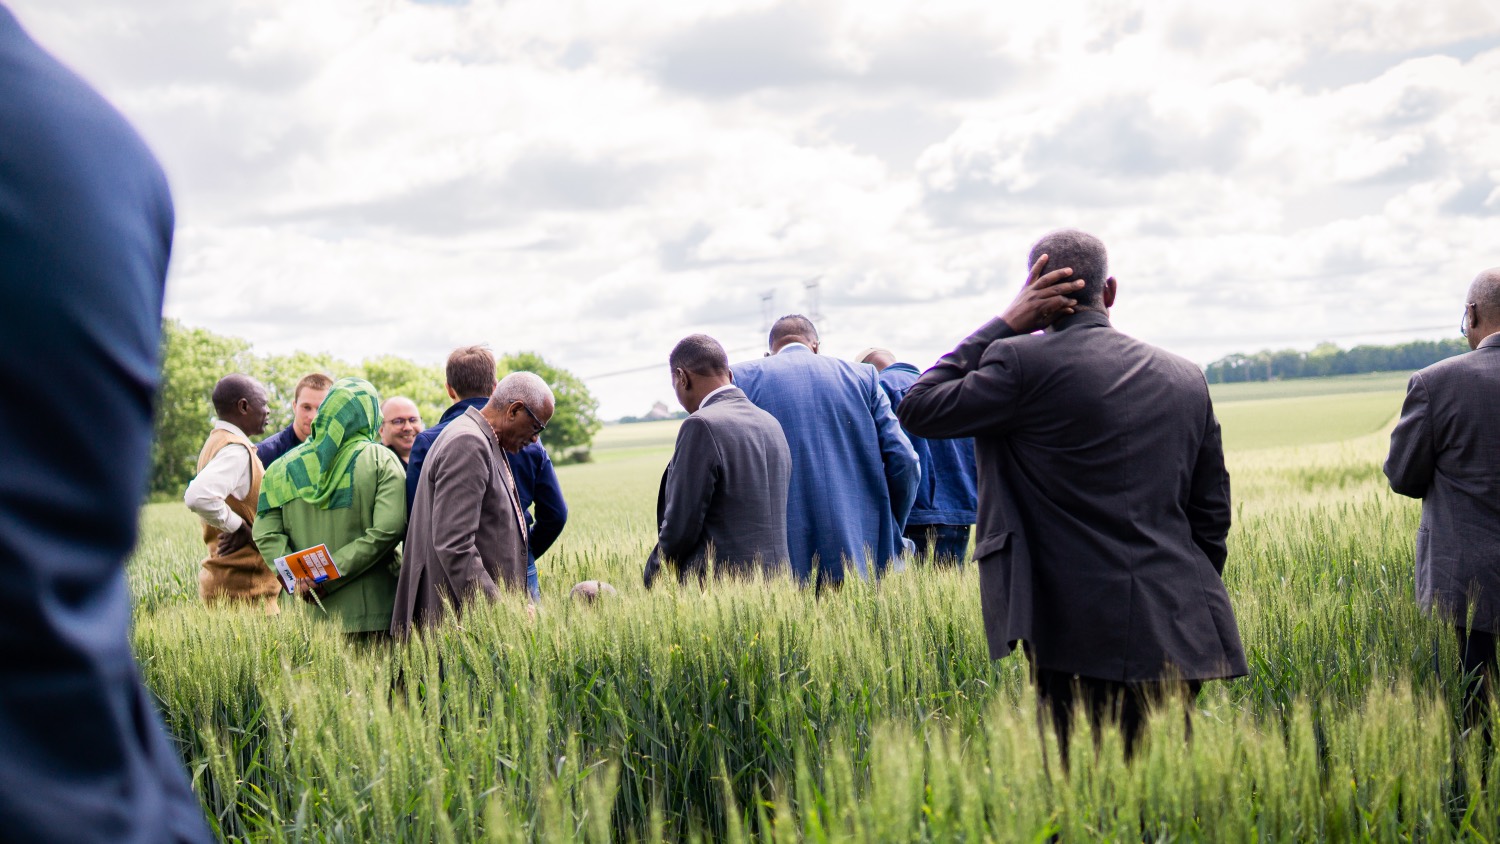 Agricultural study tour in France - Field visit